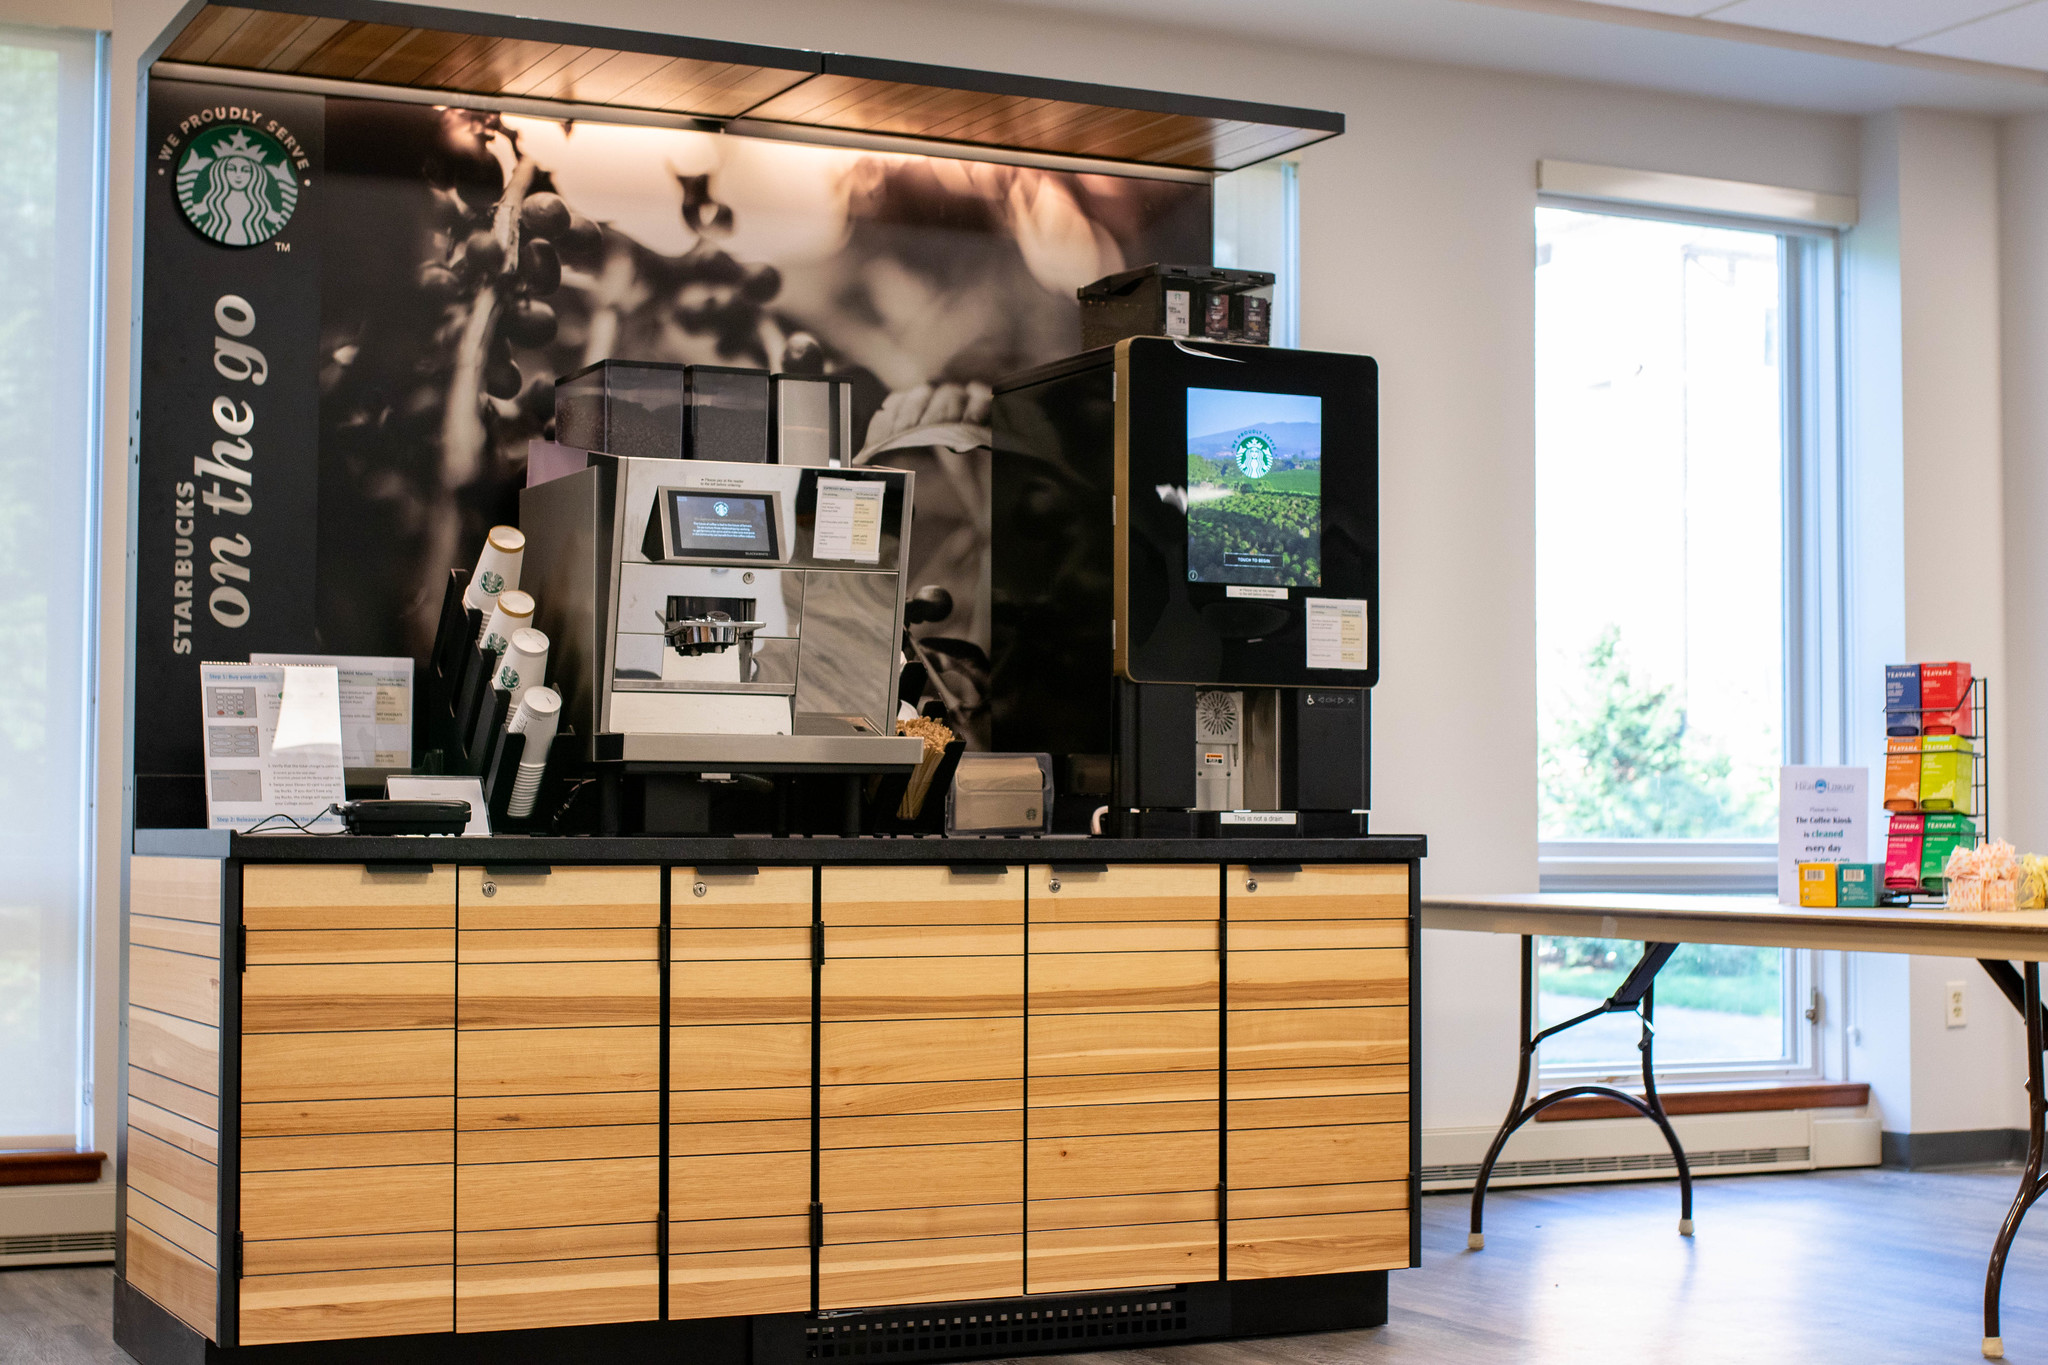 The Perfect Study Buddy Starbucks Coffee Kiosk Now Open At High